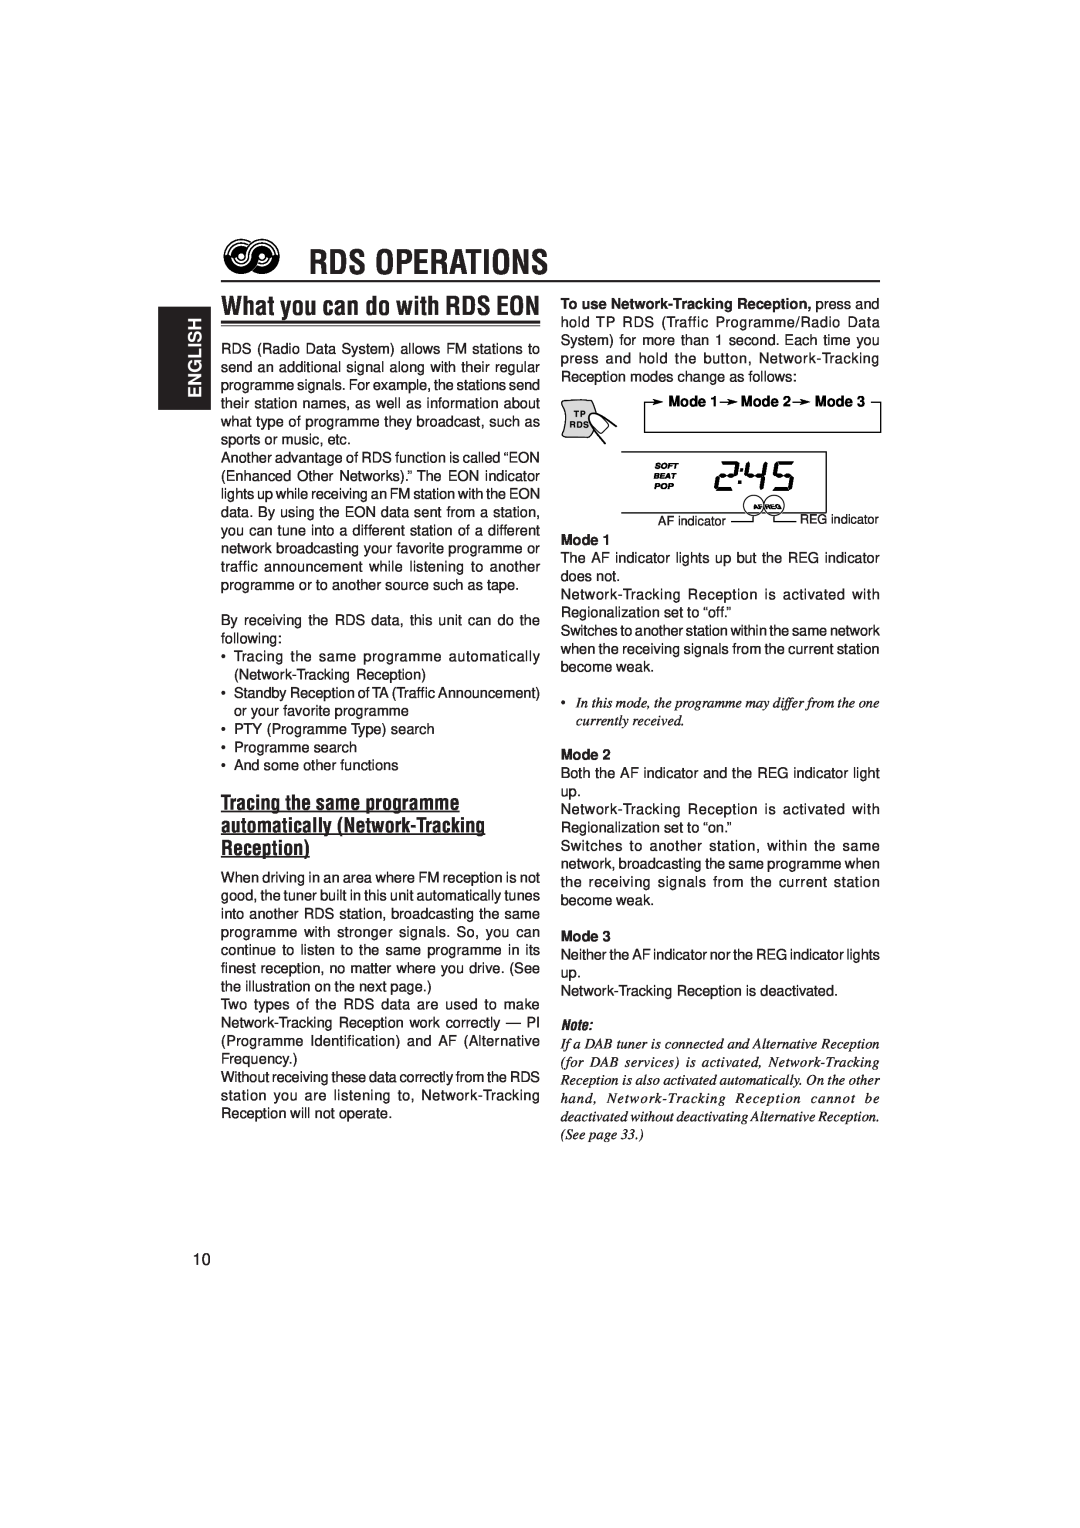 JVC KS-LX200R manual Rds Operations, What you can do with RDS EON, English, Mode 1 Mode 2 Mode 